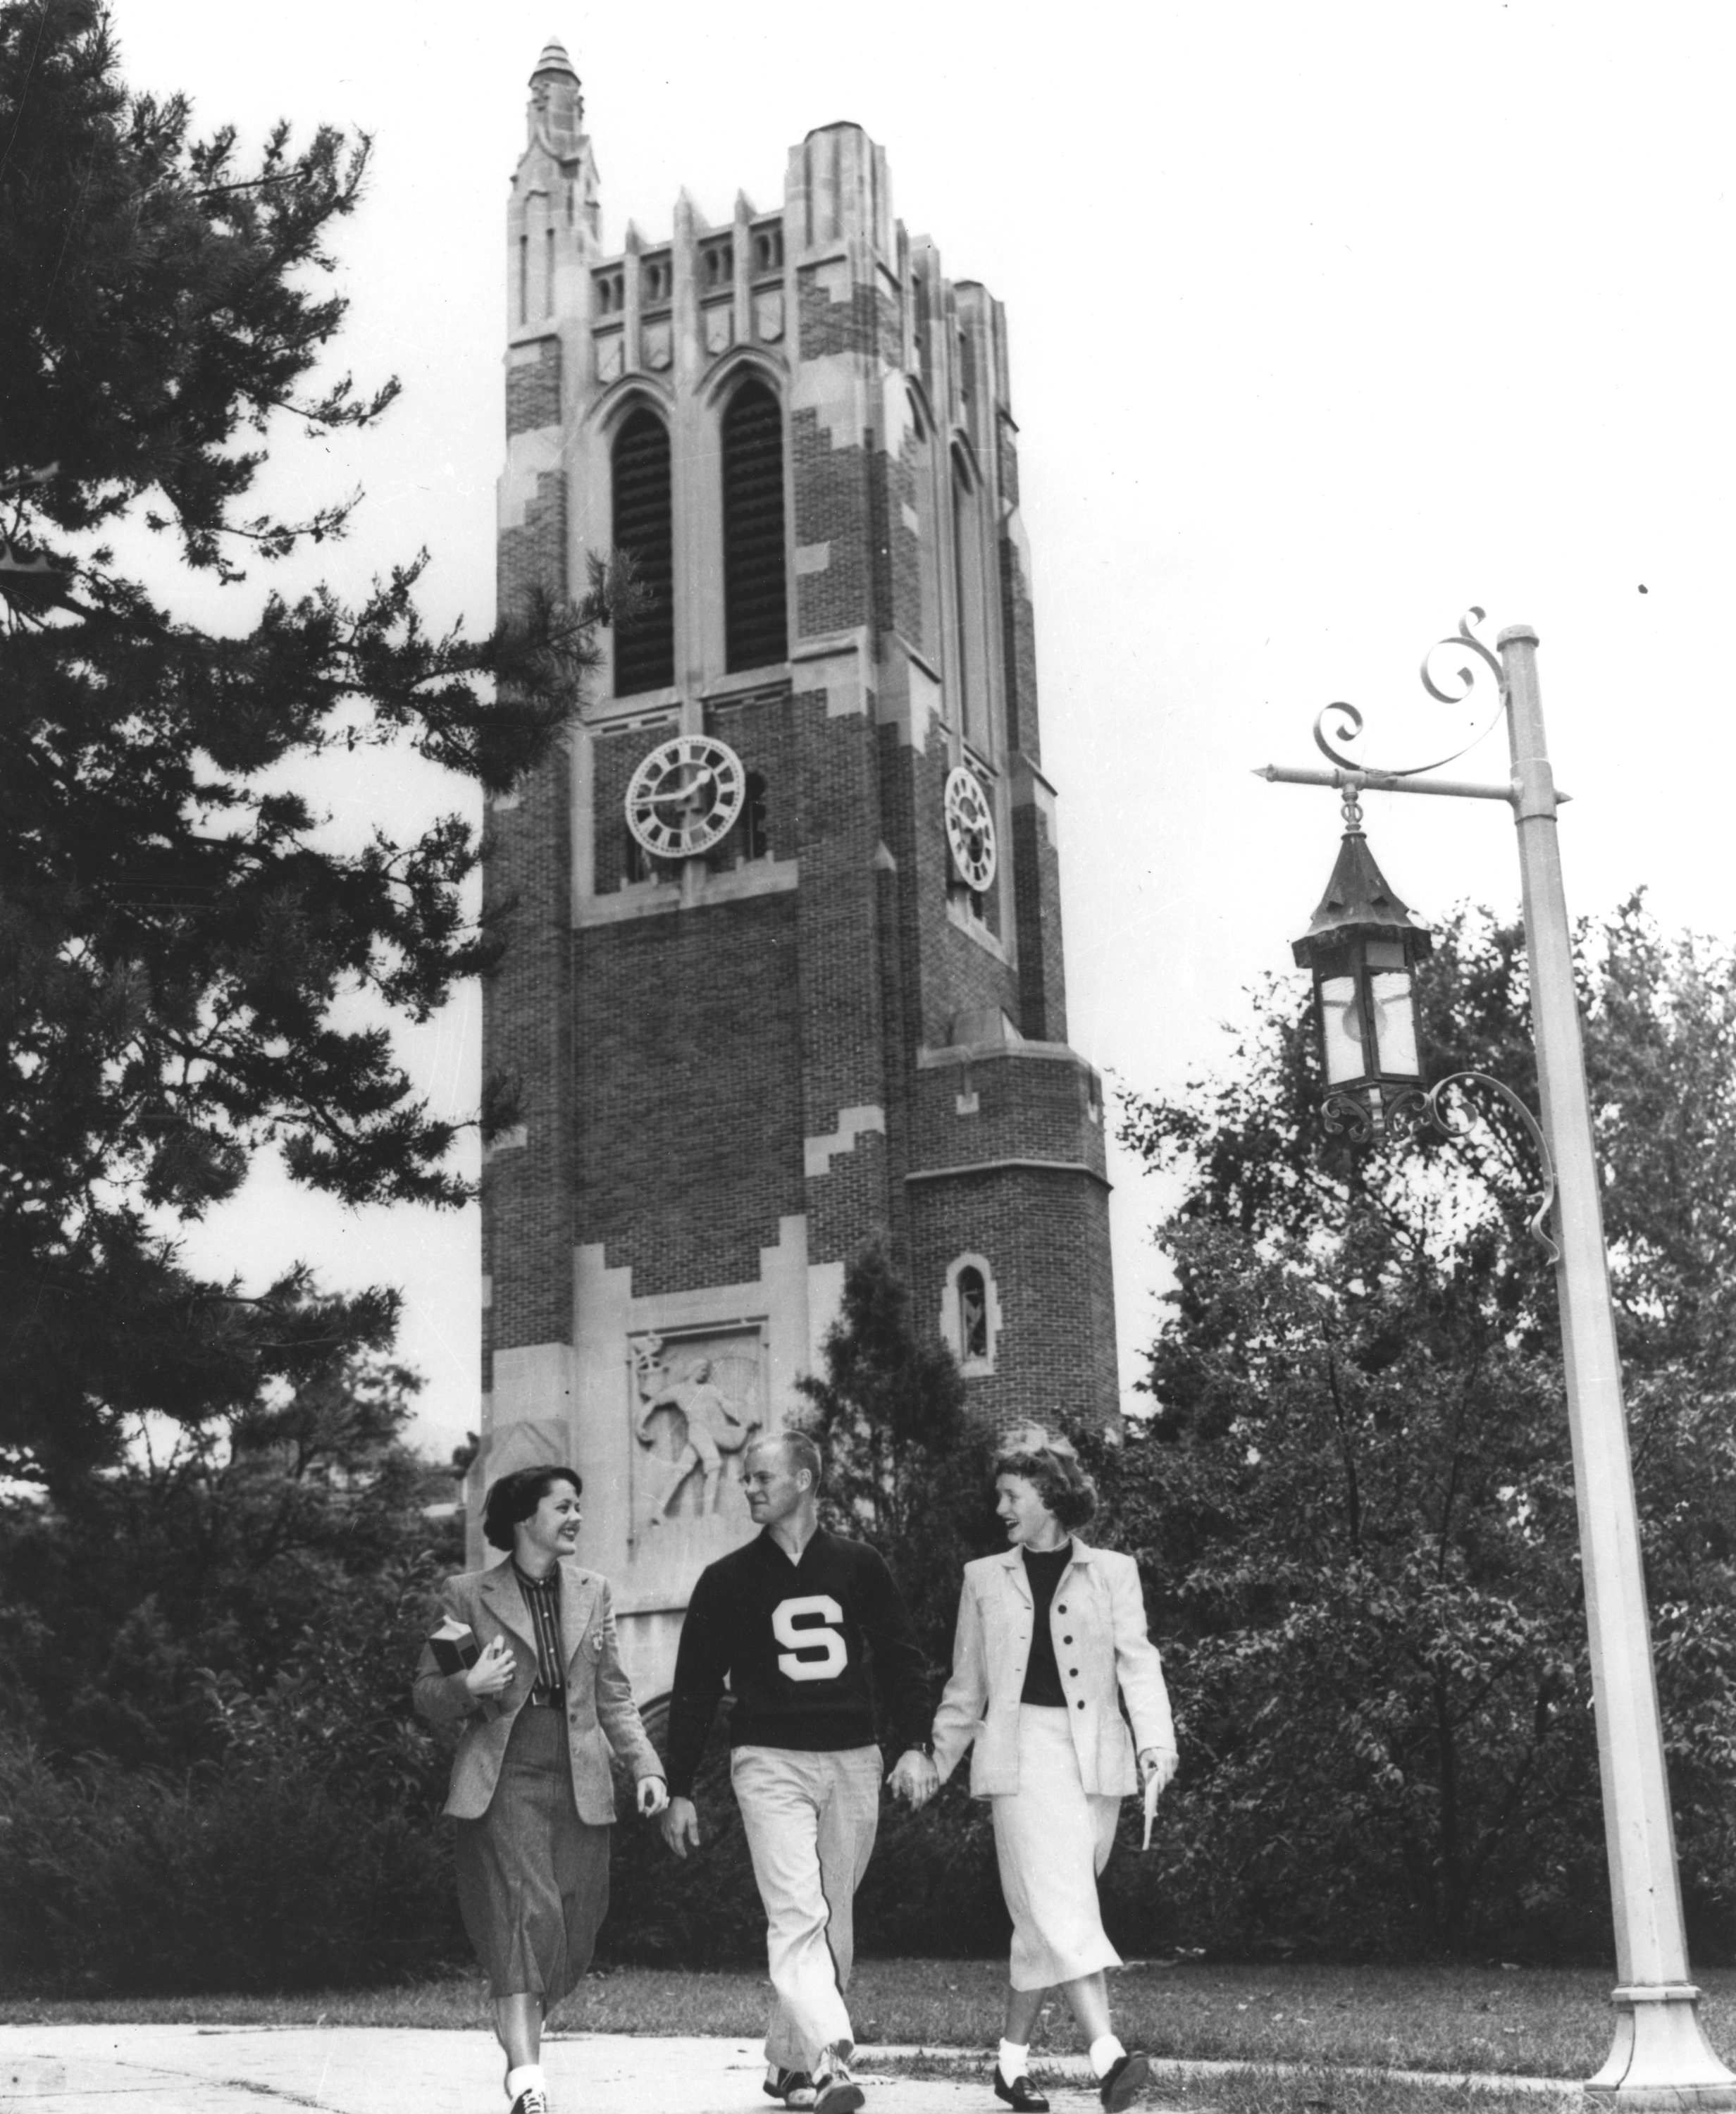 Students in front of Beaumont Tower, 1954